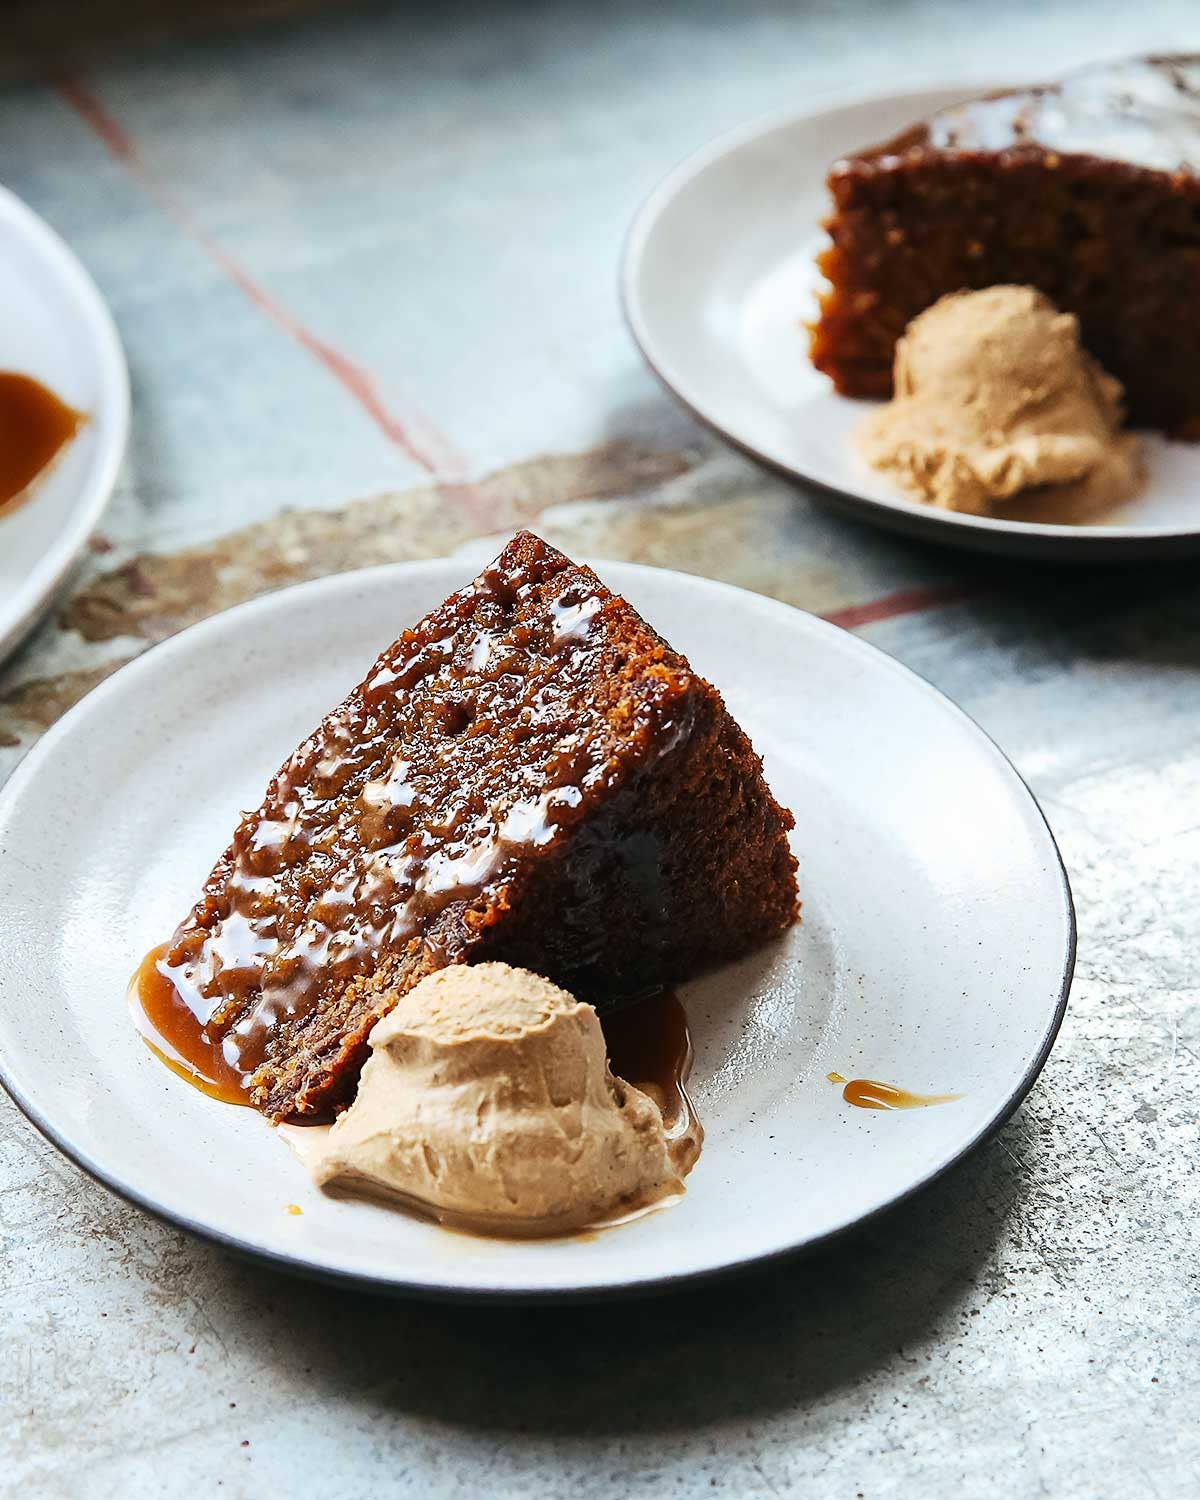 Make This Sticky Toffee Pudding For The Dessert (or Breakfast) of Your Dreams